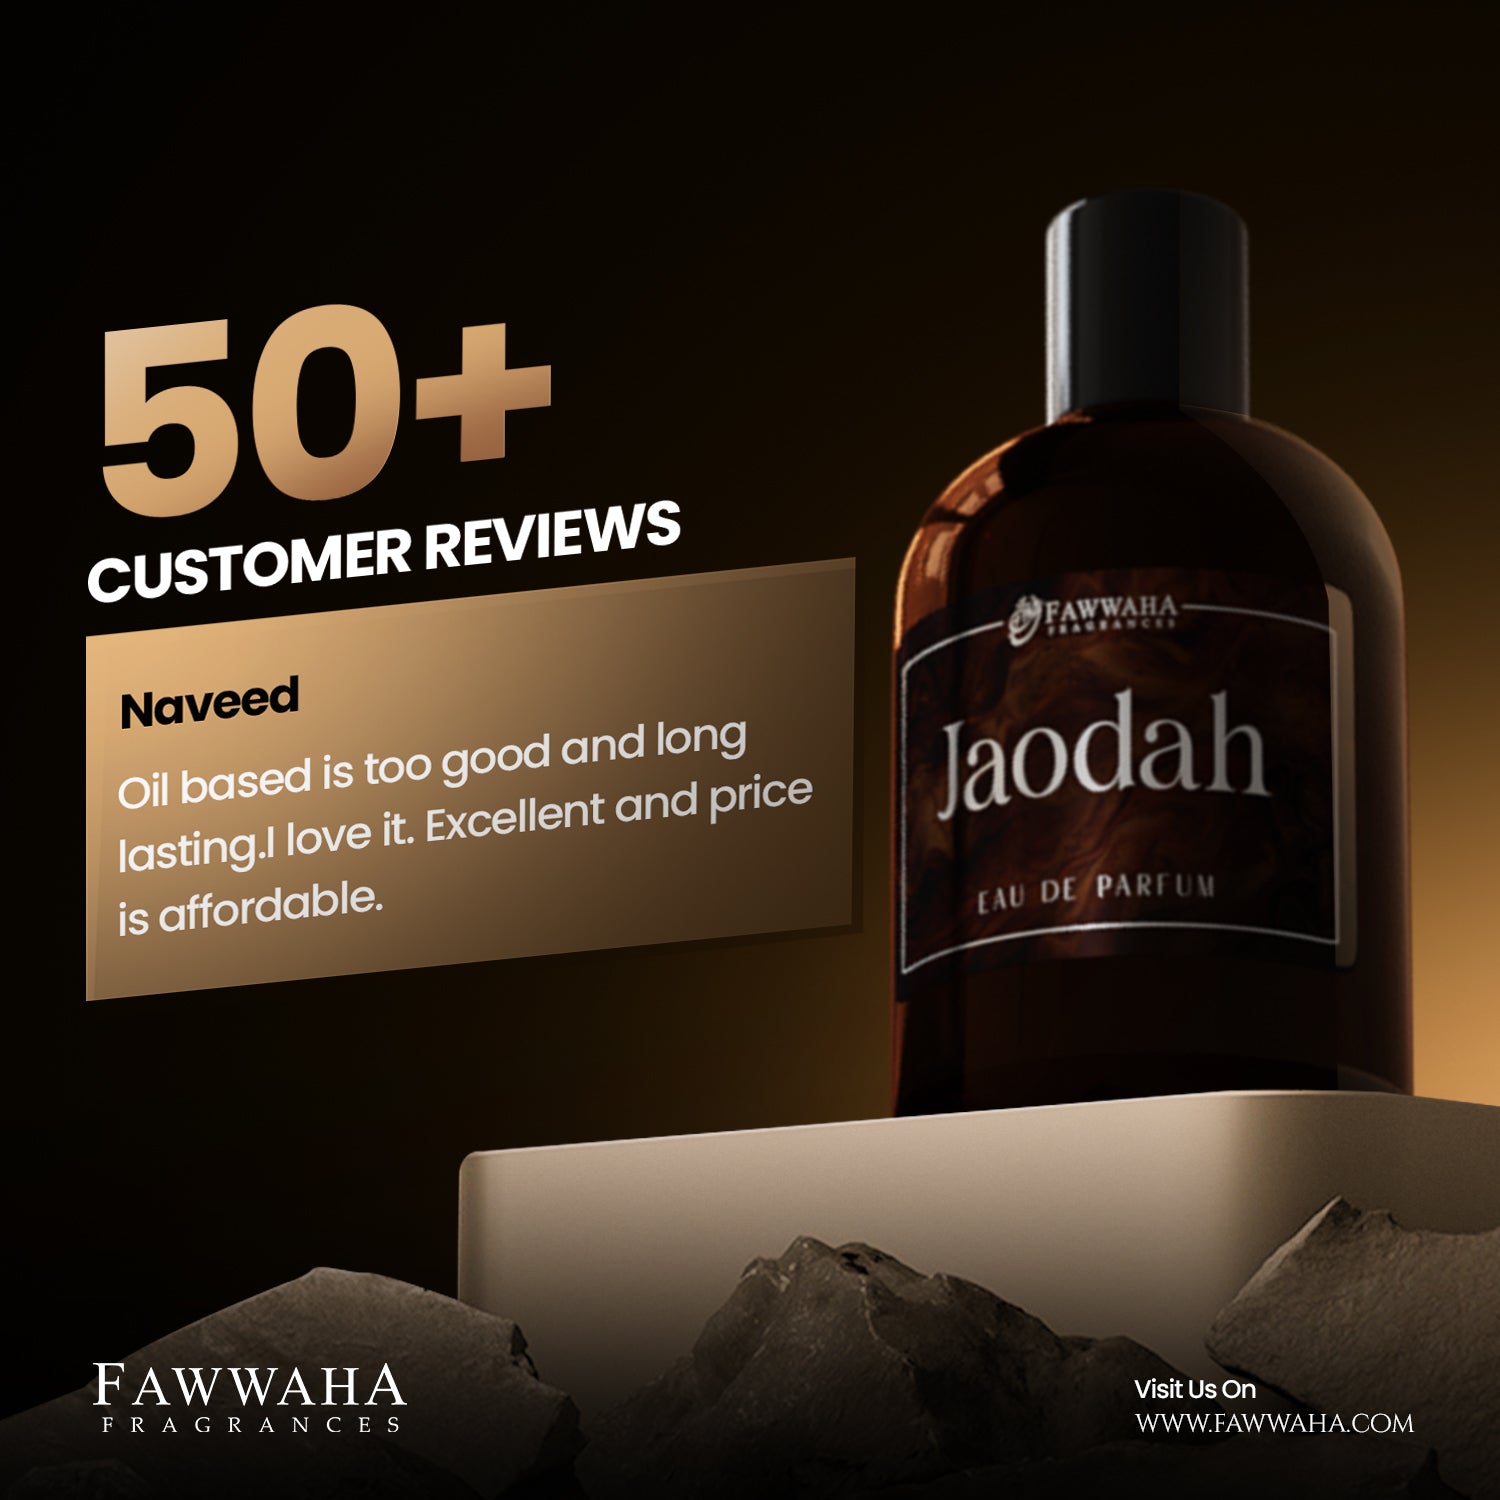 JAODAH (OUR IMPRESSION OF TOMFORD' S OUD WOOD)